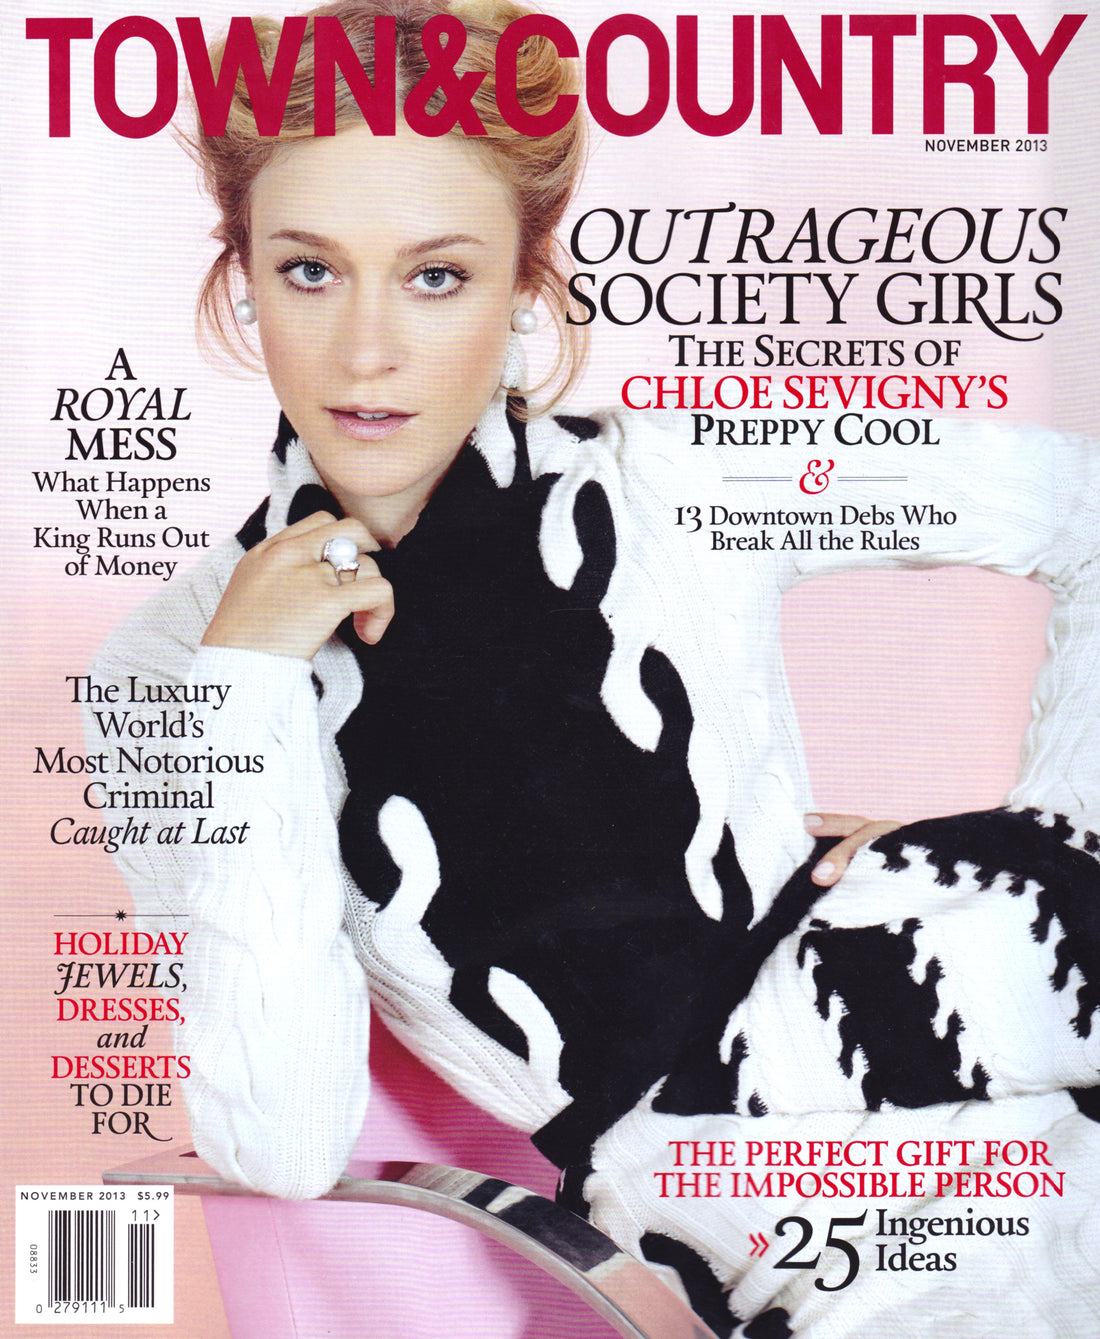 Town & Country - November 2013